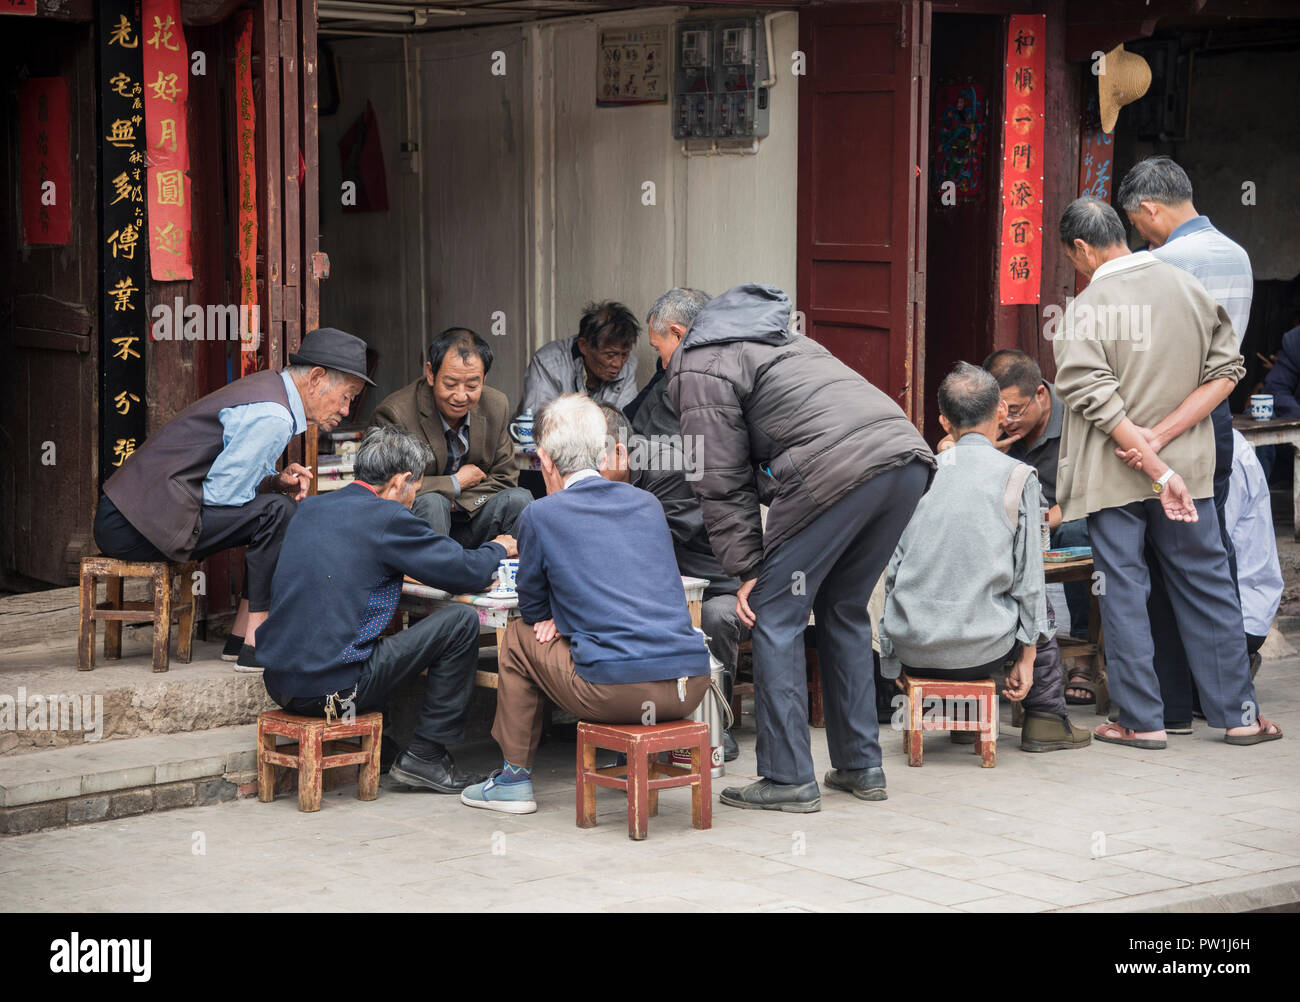 Chinese men playing board game in a street in Dali, Yunnan province  South West China. Stock Photo